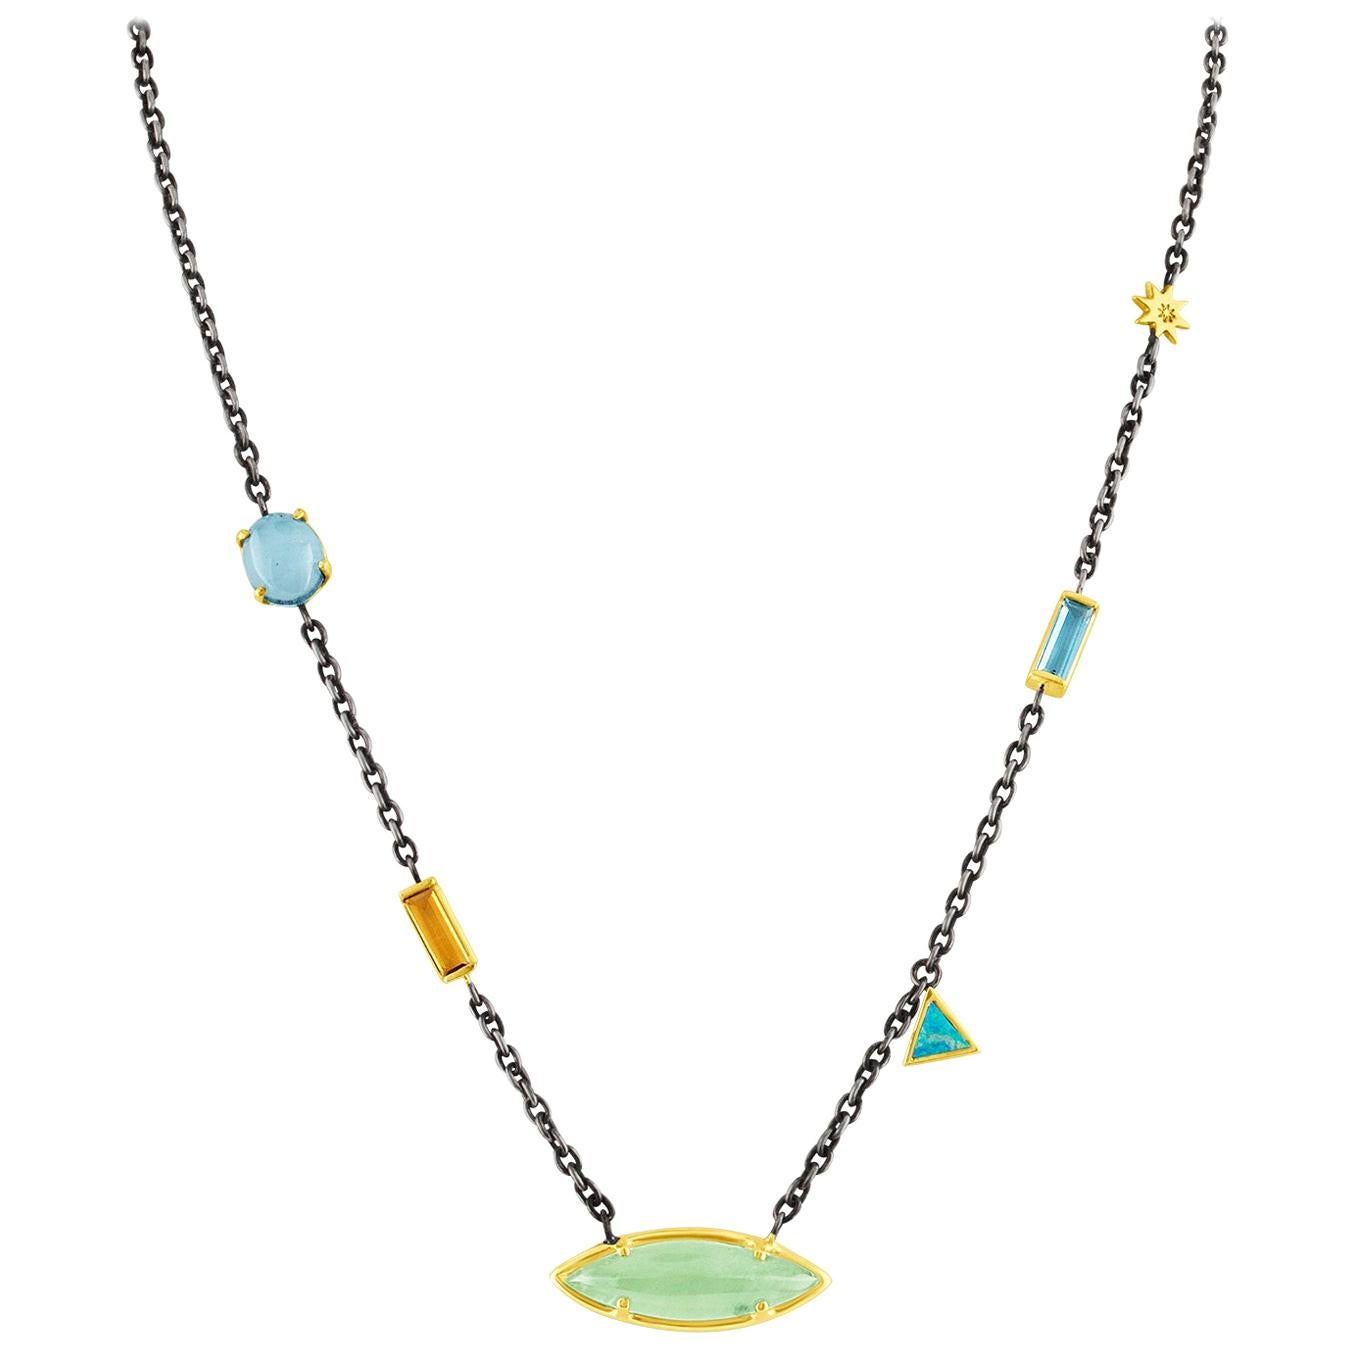 Silver and Gold Chain Necklace with Aquamarine, Blue Topaz, Citrine & Opal